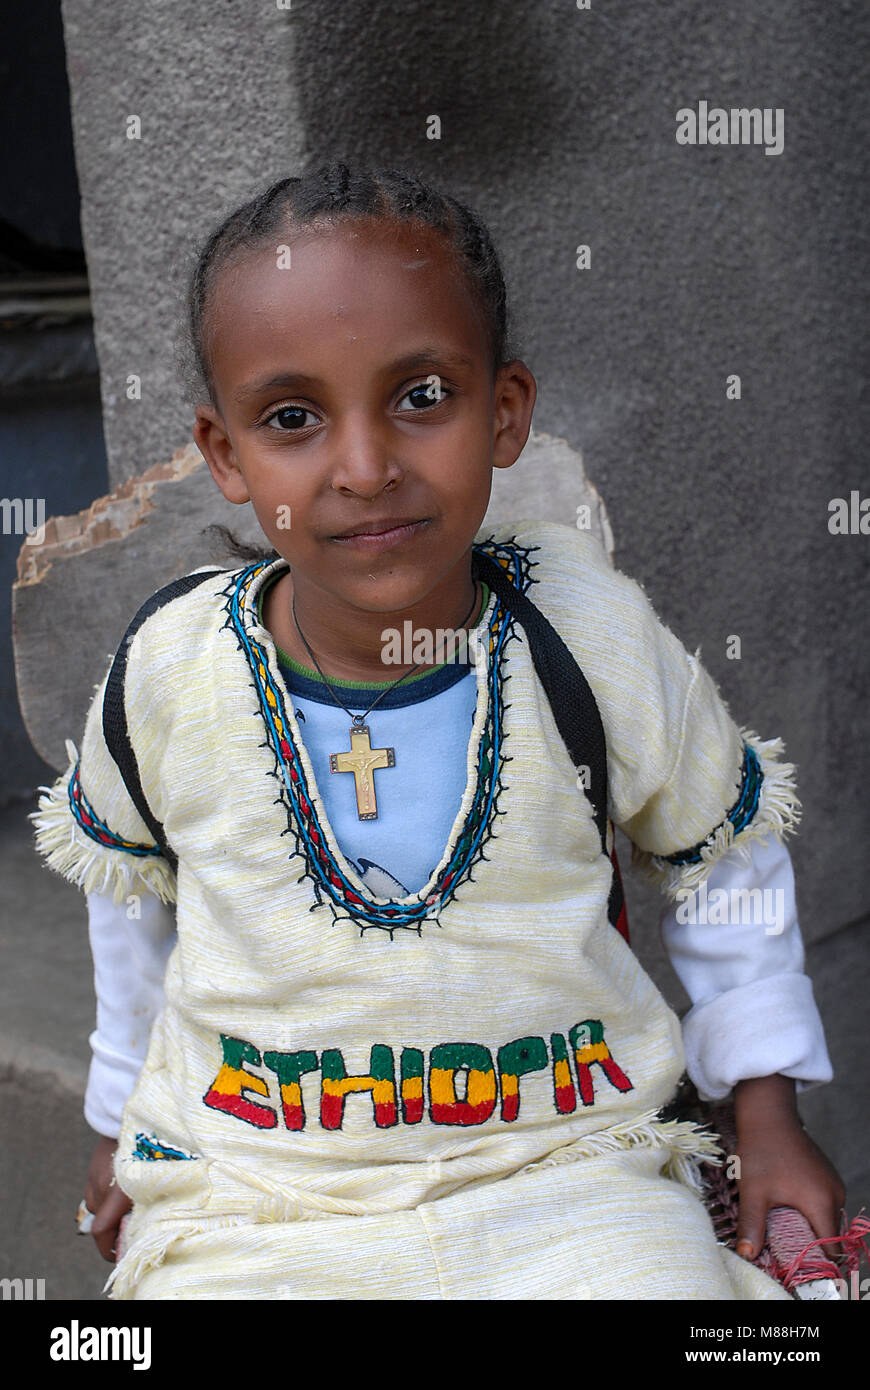 Ethiopia, Addis Ababa, girl with cross and cotton dress / Maedchen mit tradtioneller Kleidung Stock Photo